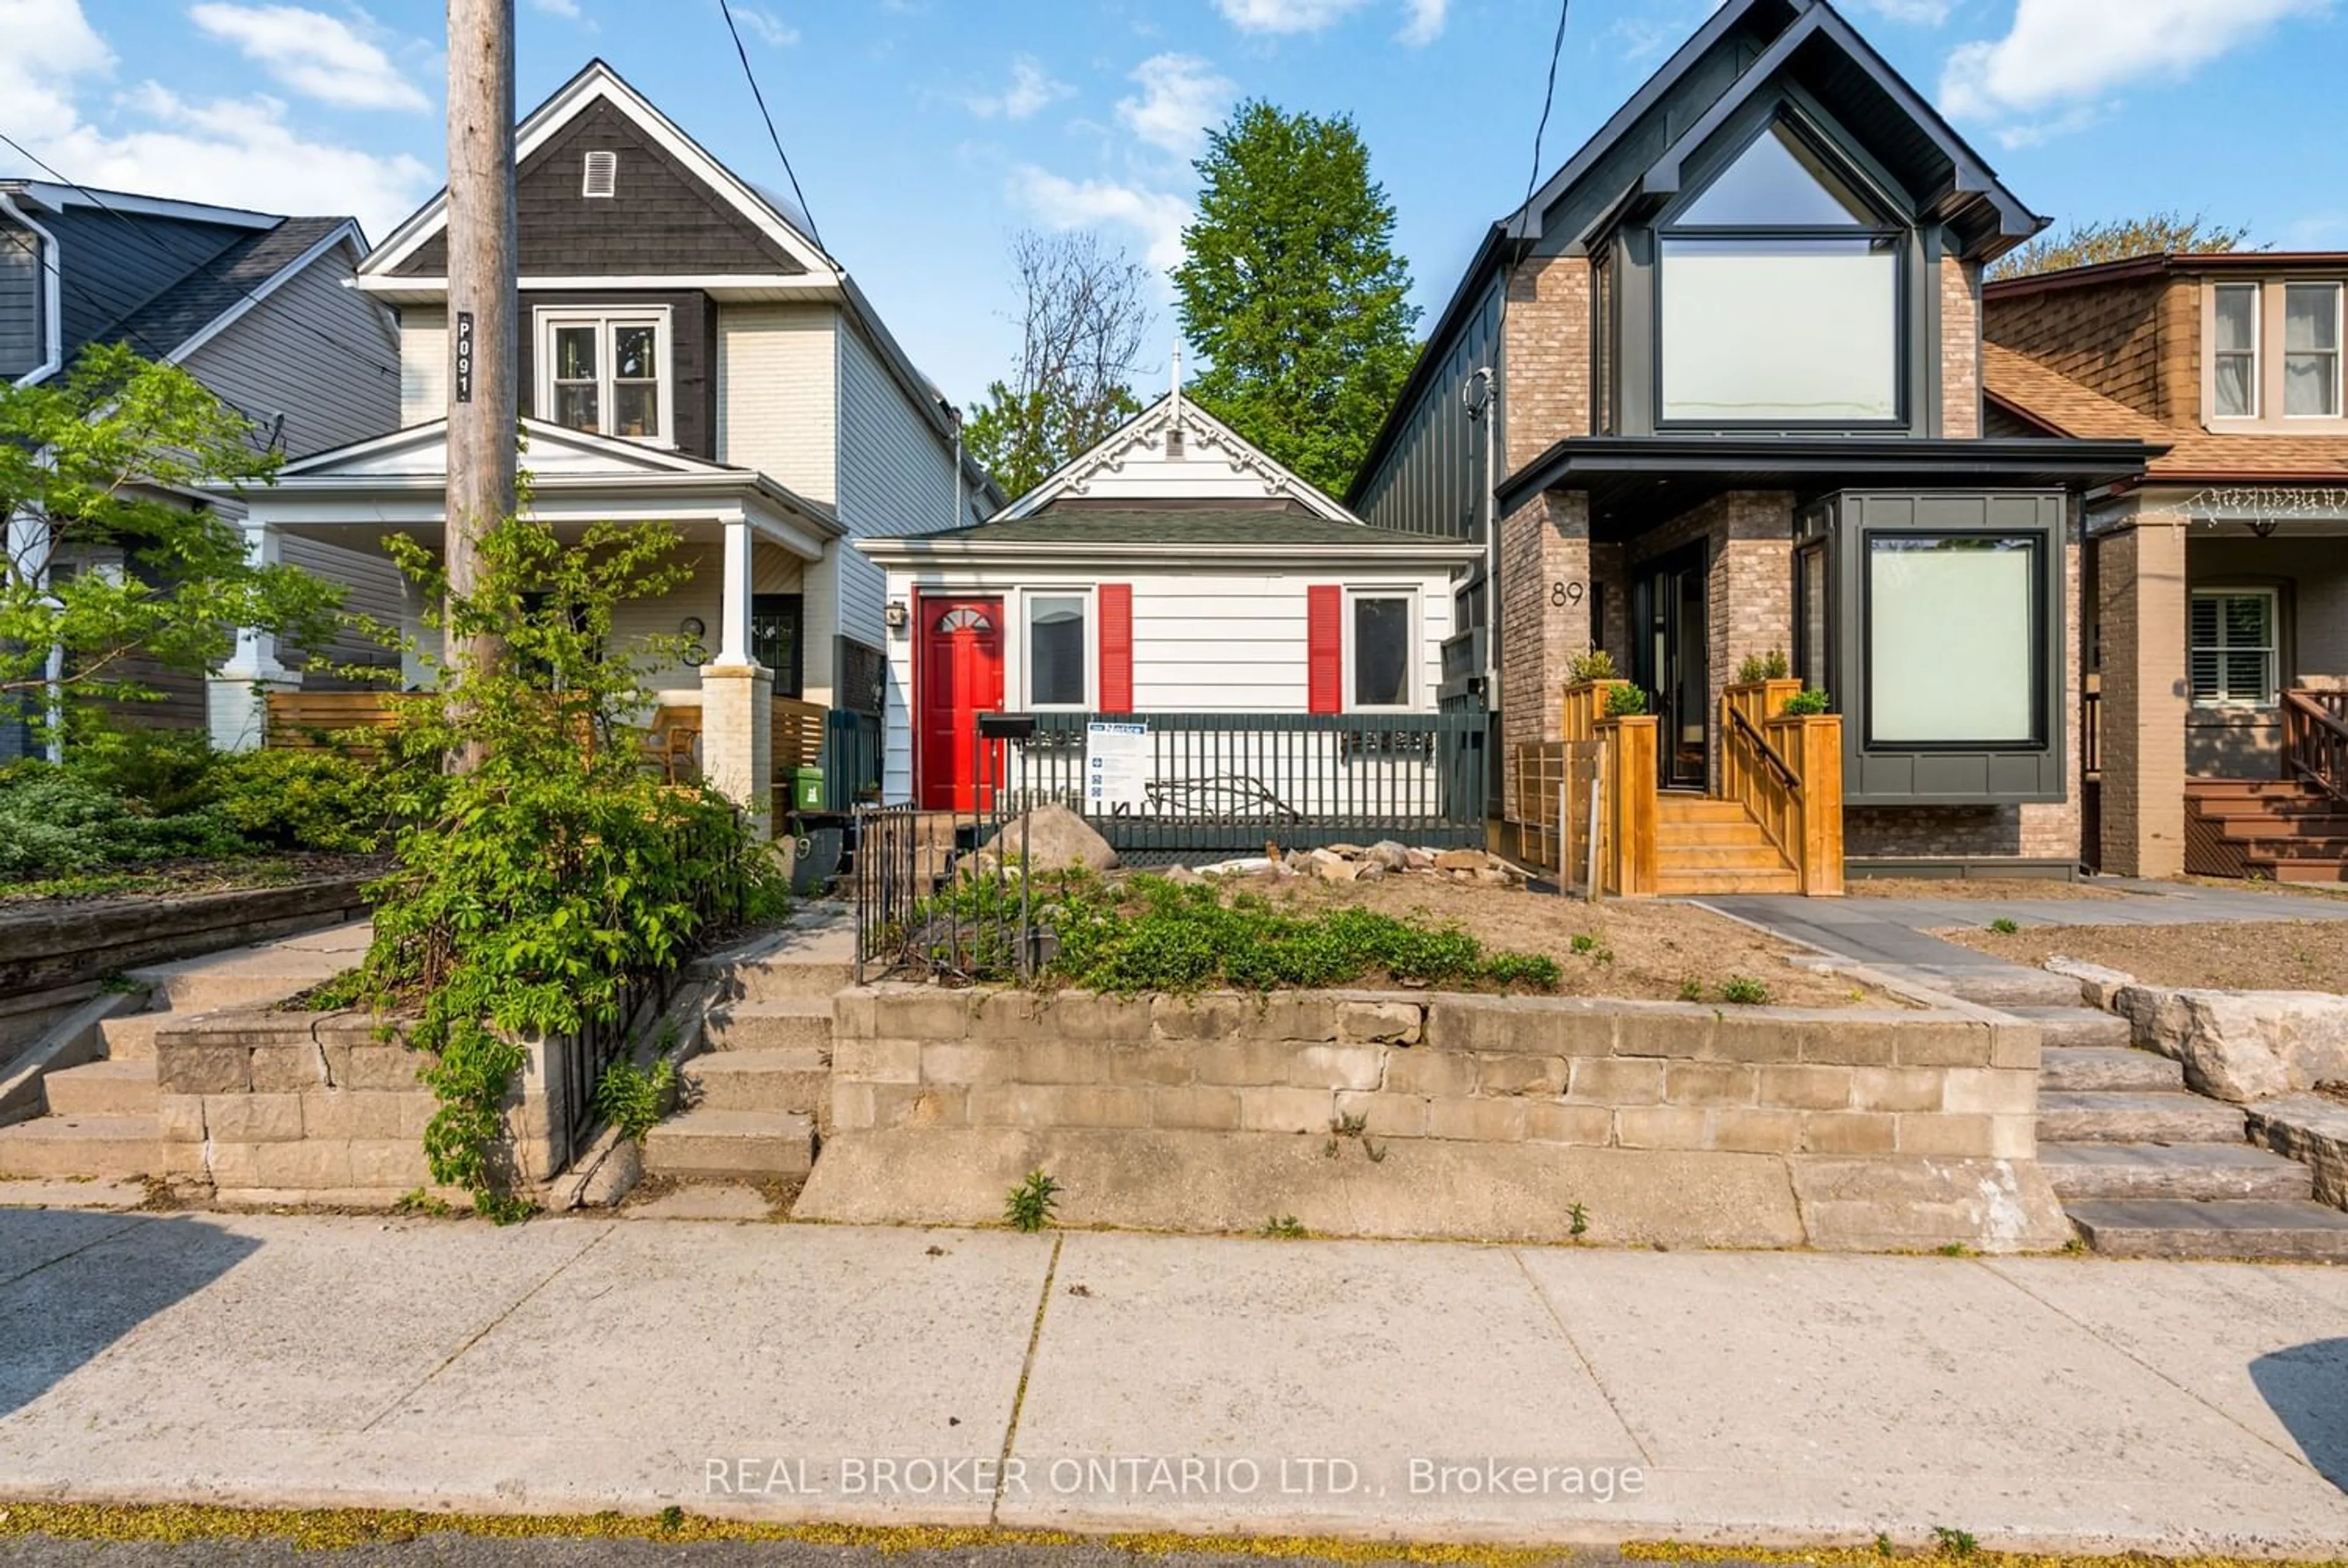 Frontside or backside of a home for 91 Drayton Ave, Toronto Ontario M4C 3L8